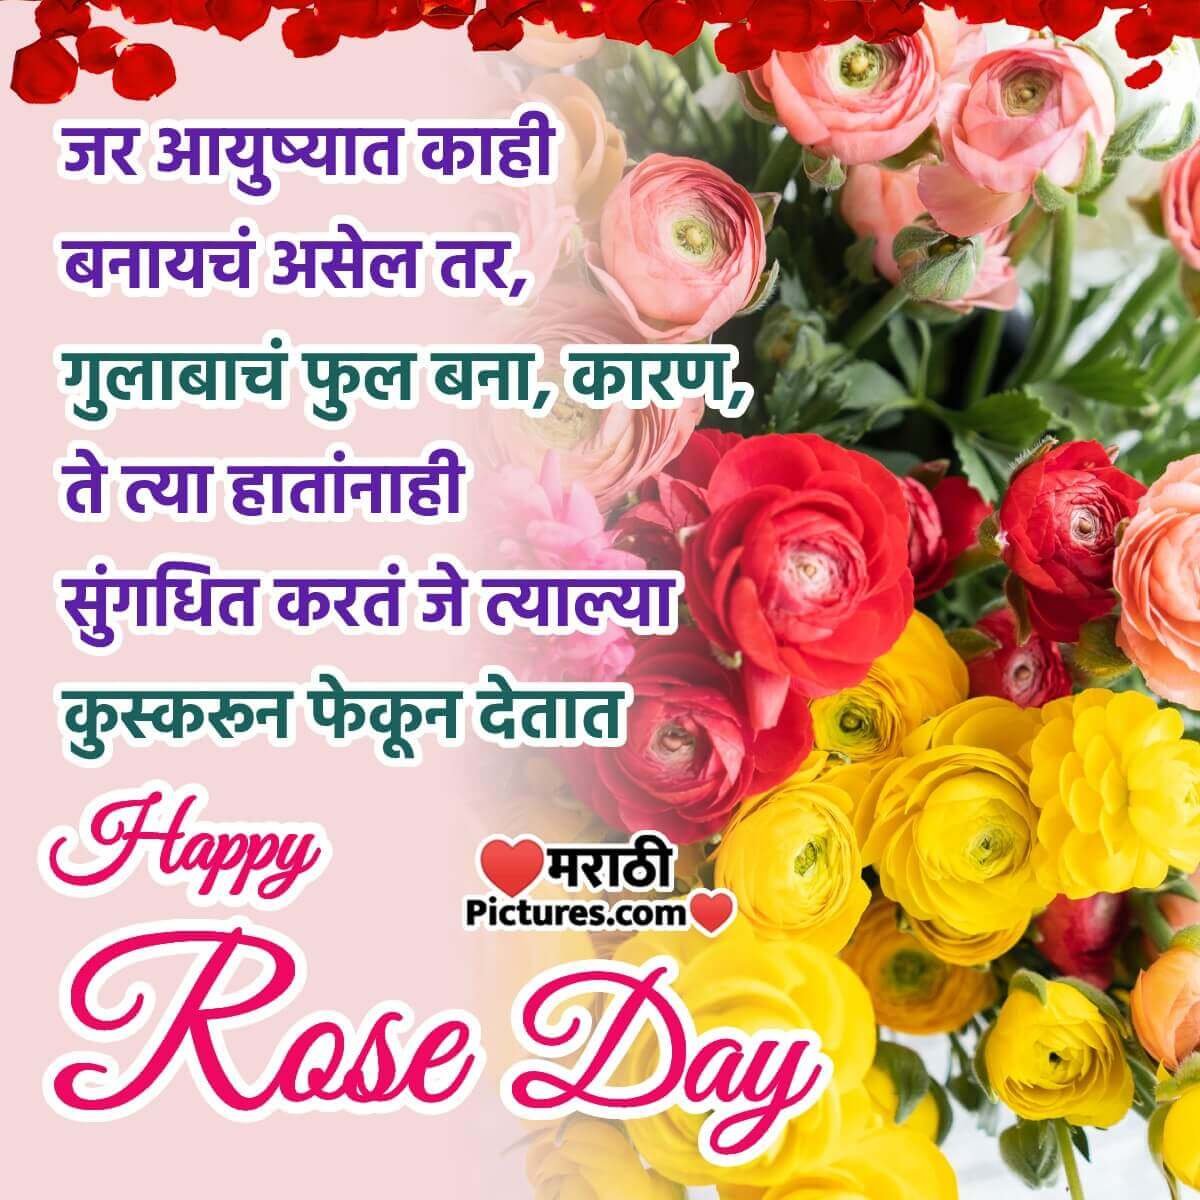 Happy Rose Day Greeting Photo